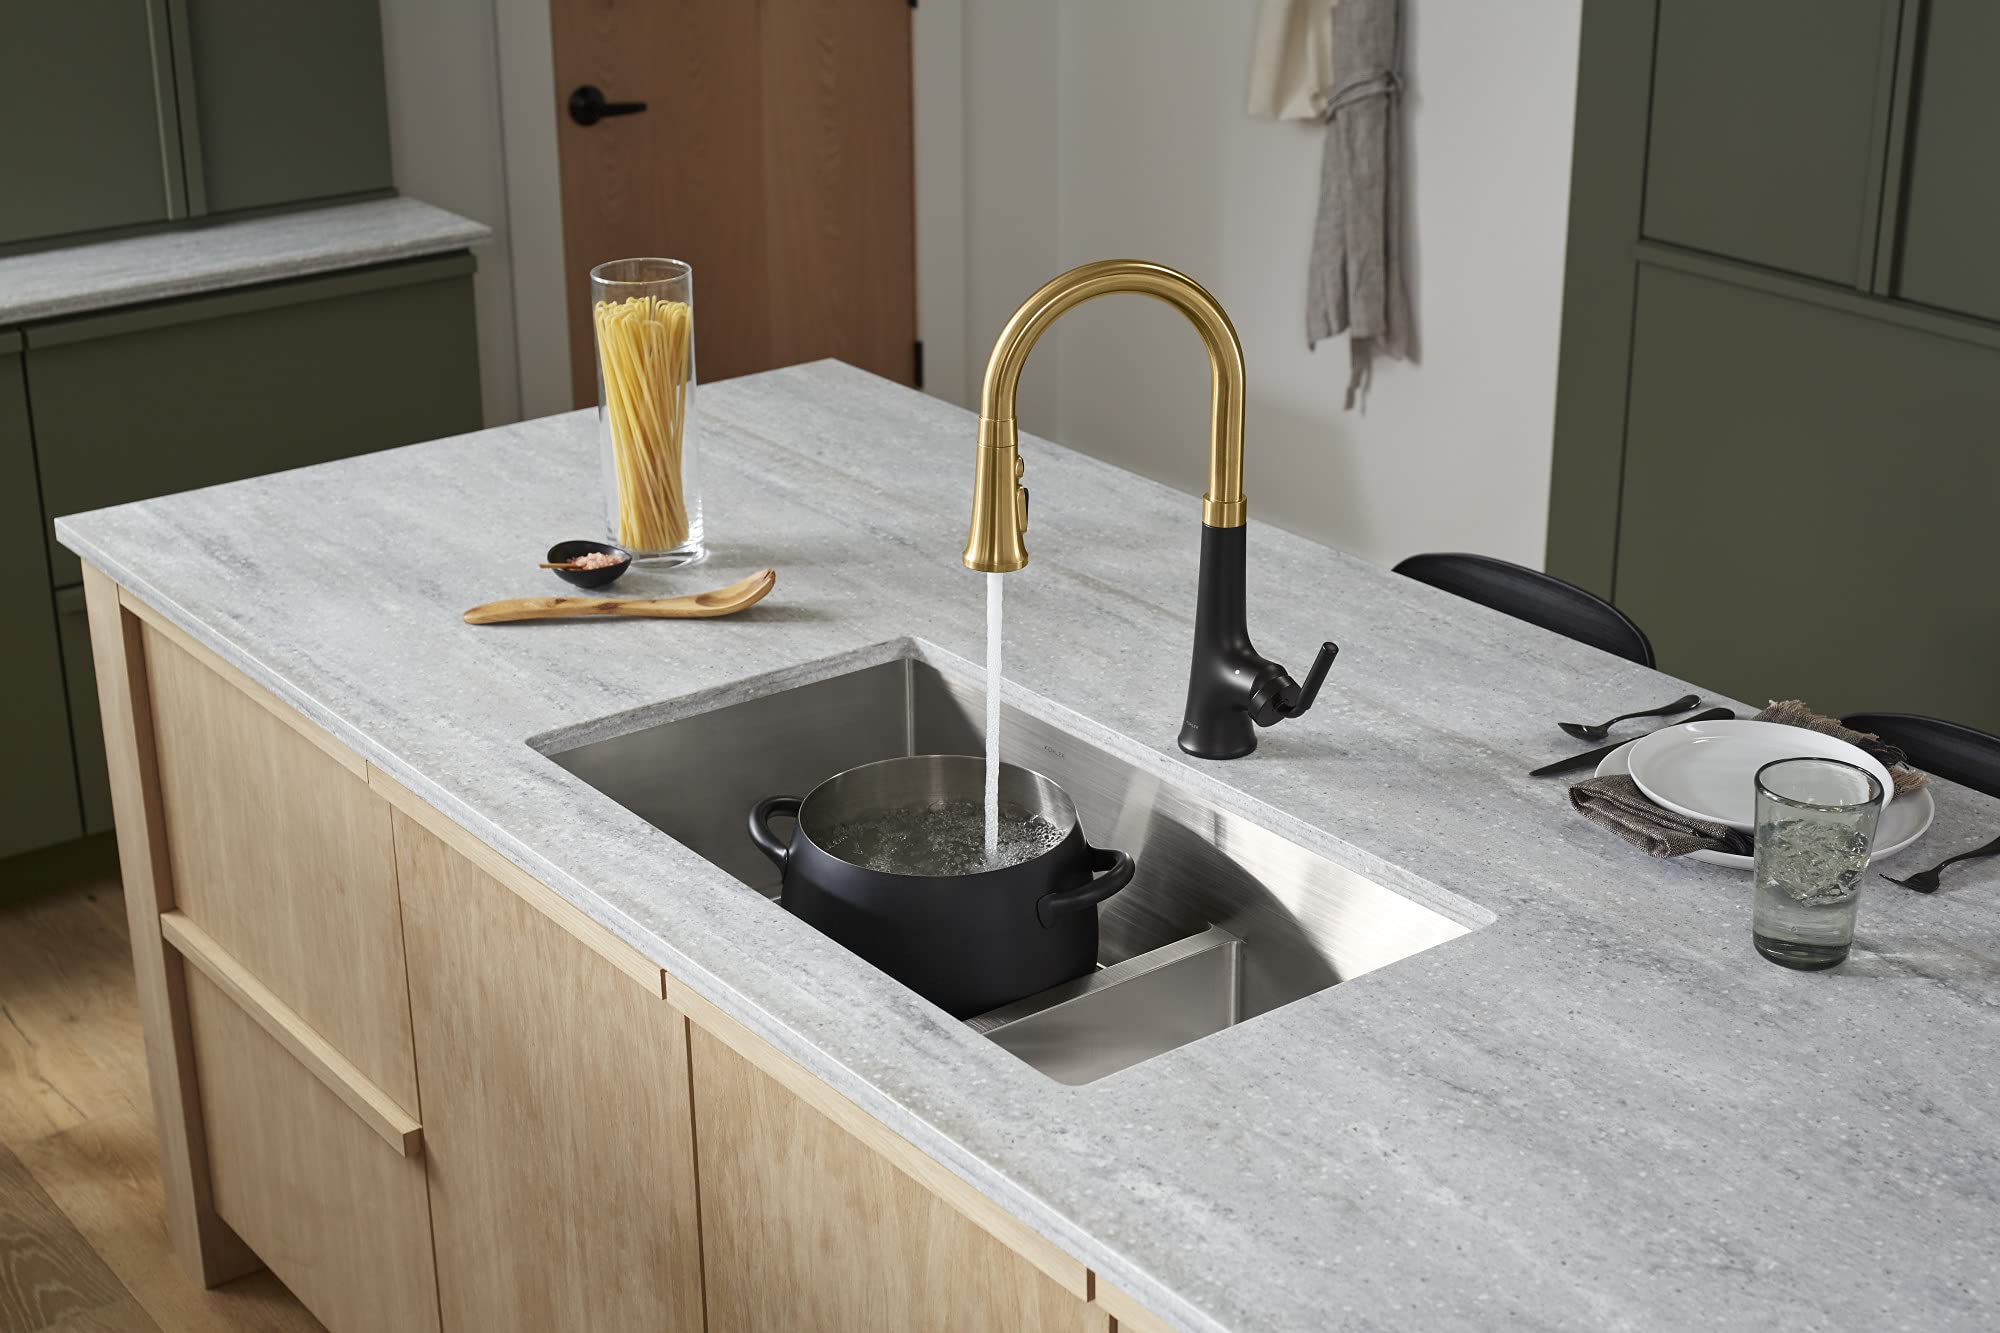 Kohler 23766-WB-BMB Tone Voice-Activated Sink, Touchless Kitchen Faucet with Pull Down Sprayer, Matte Black Moderne Brass